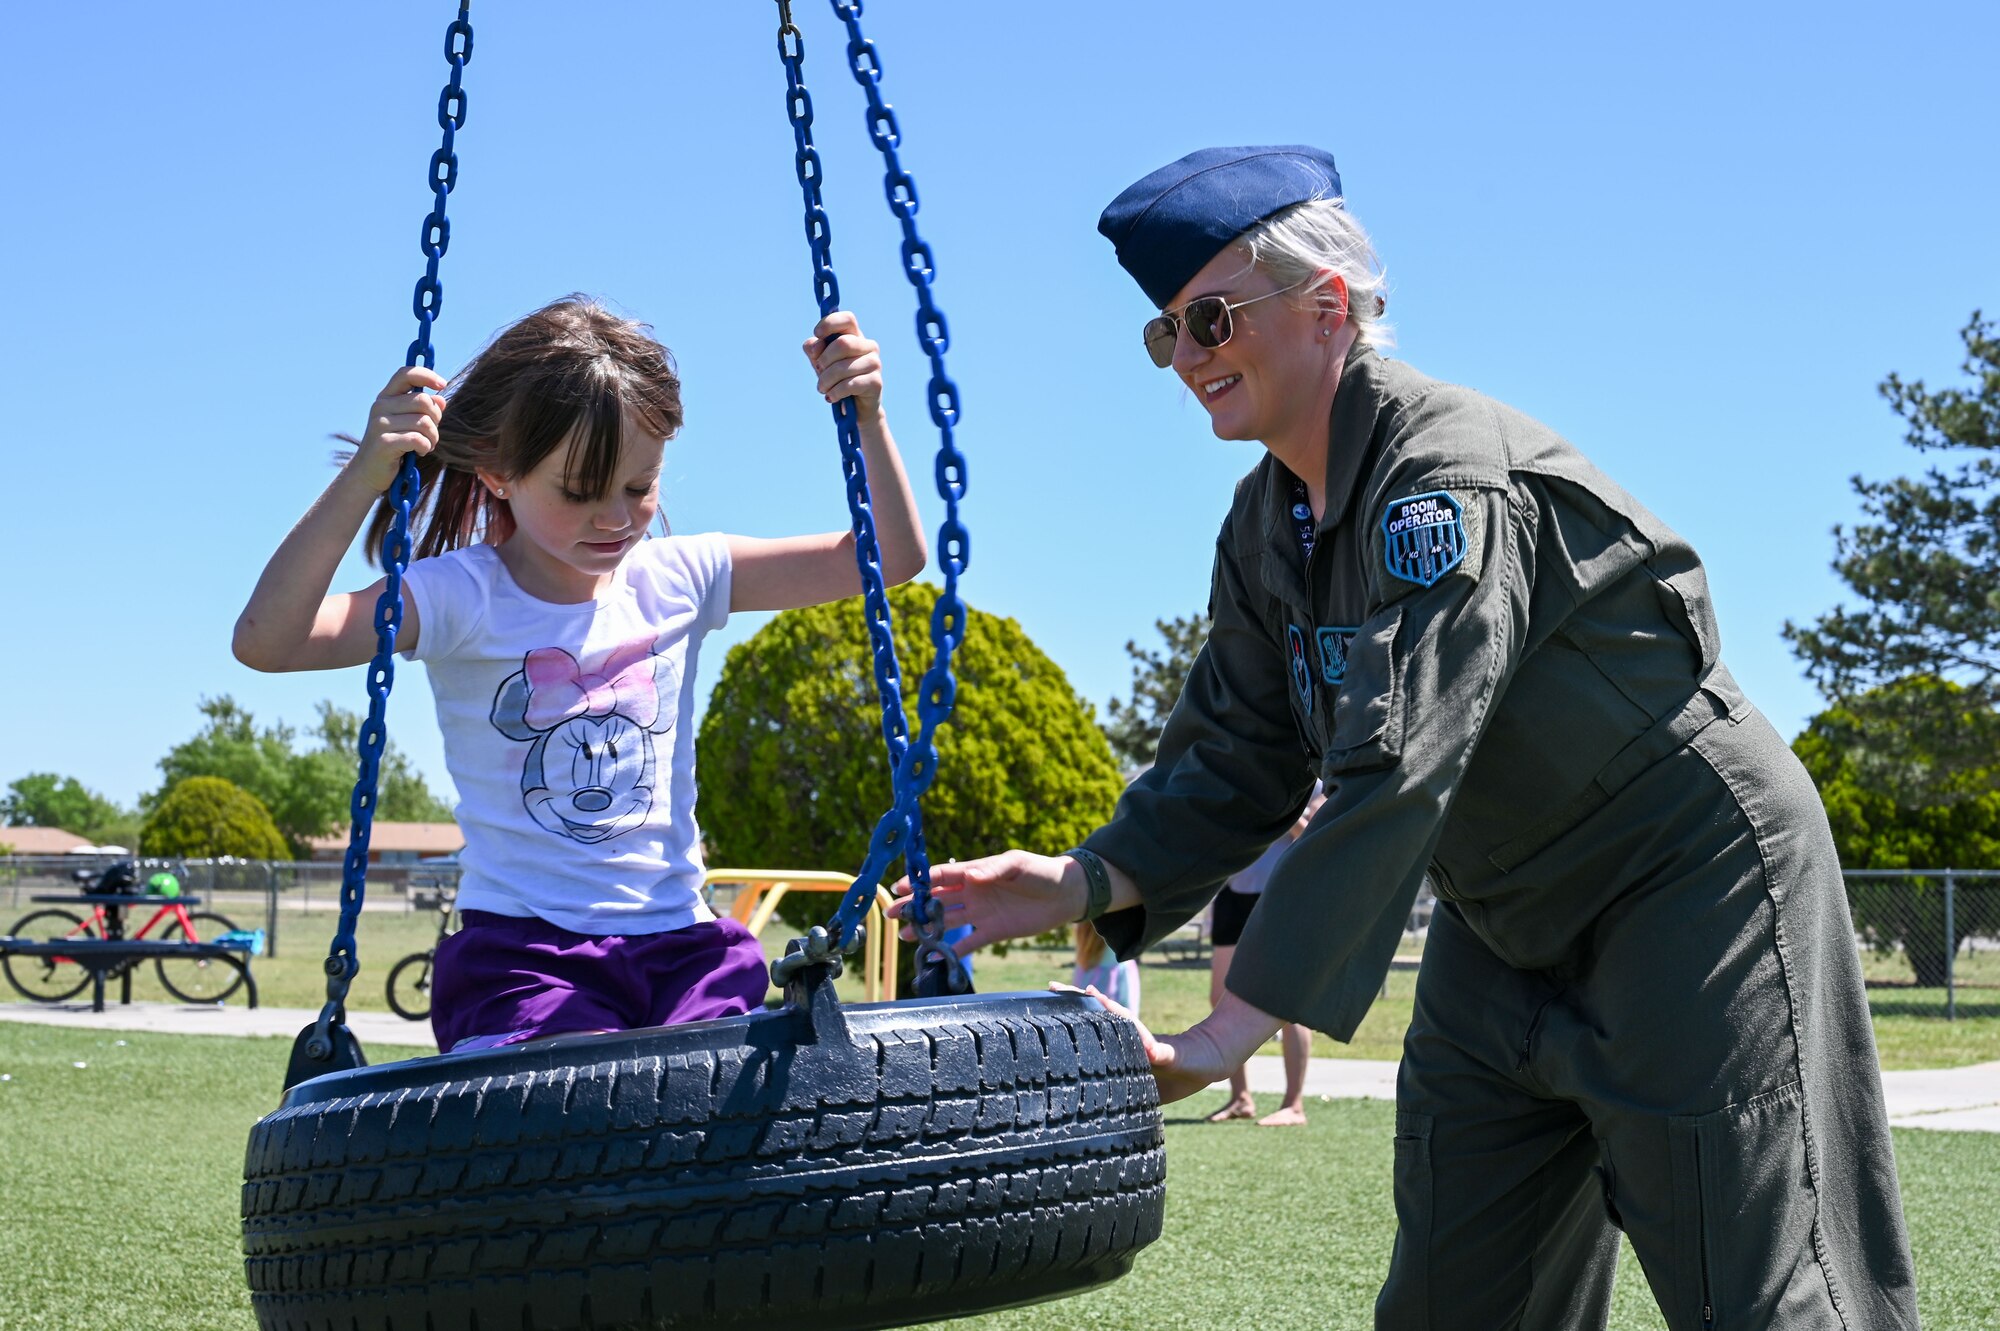 U.S. Air Force Staff Sgt. Lacy Pickett, 54th Air Refueling Squadron boom operator instructor, pushes her daughter, Carson, in a tire swing at Altus Air Force Base, Oklahoma, May 5, 2023. Of the 472,410 active duty parents, 85.8% are male and 14.2% are female. (U.S. Air Force photo by Senior Airman Kayla Christenson)